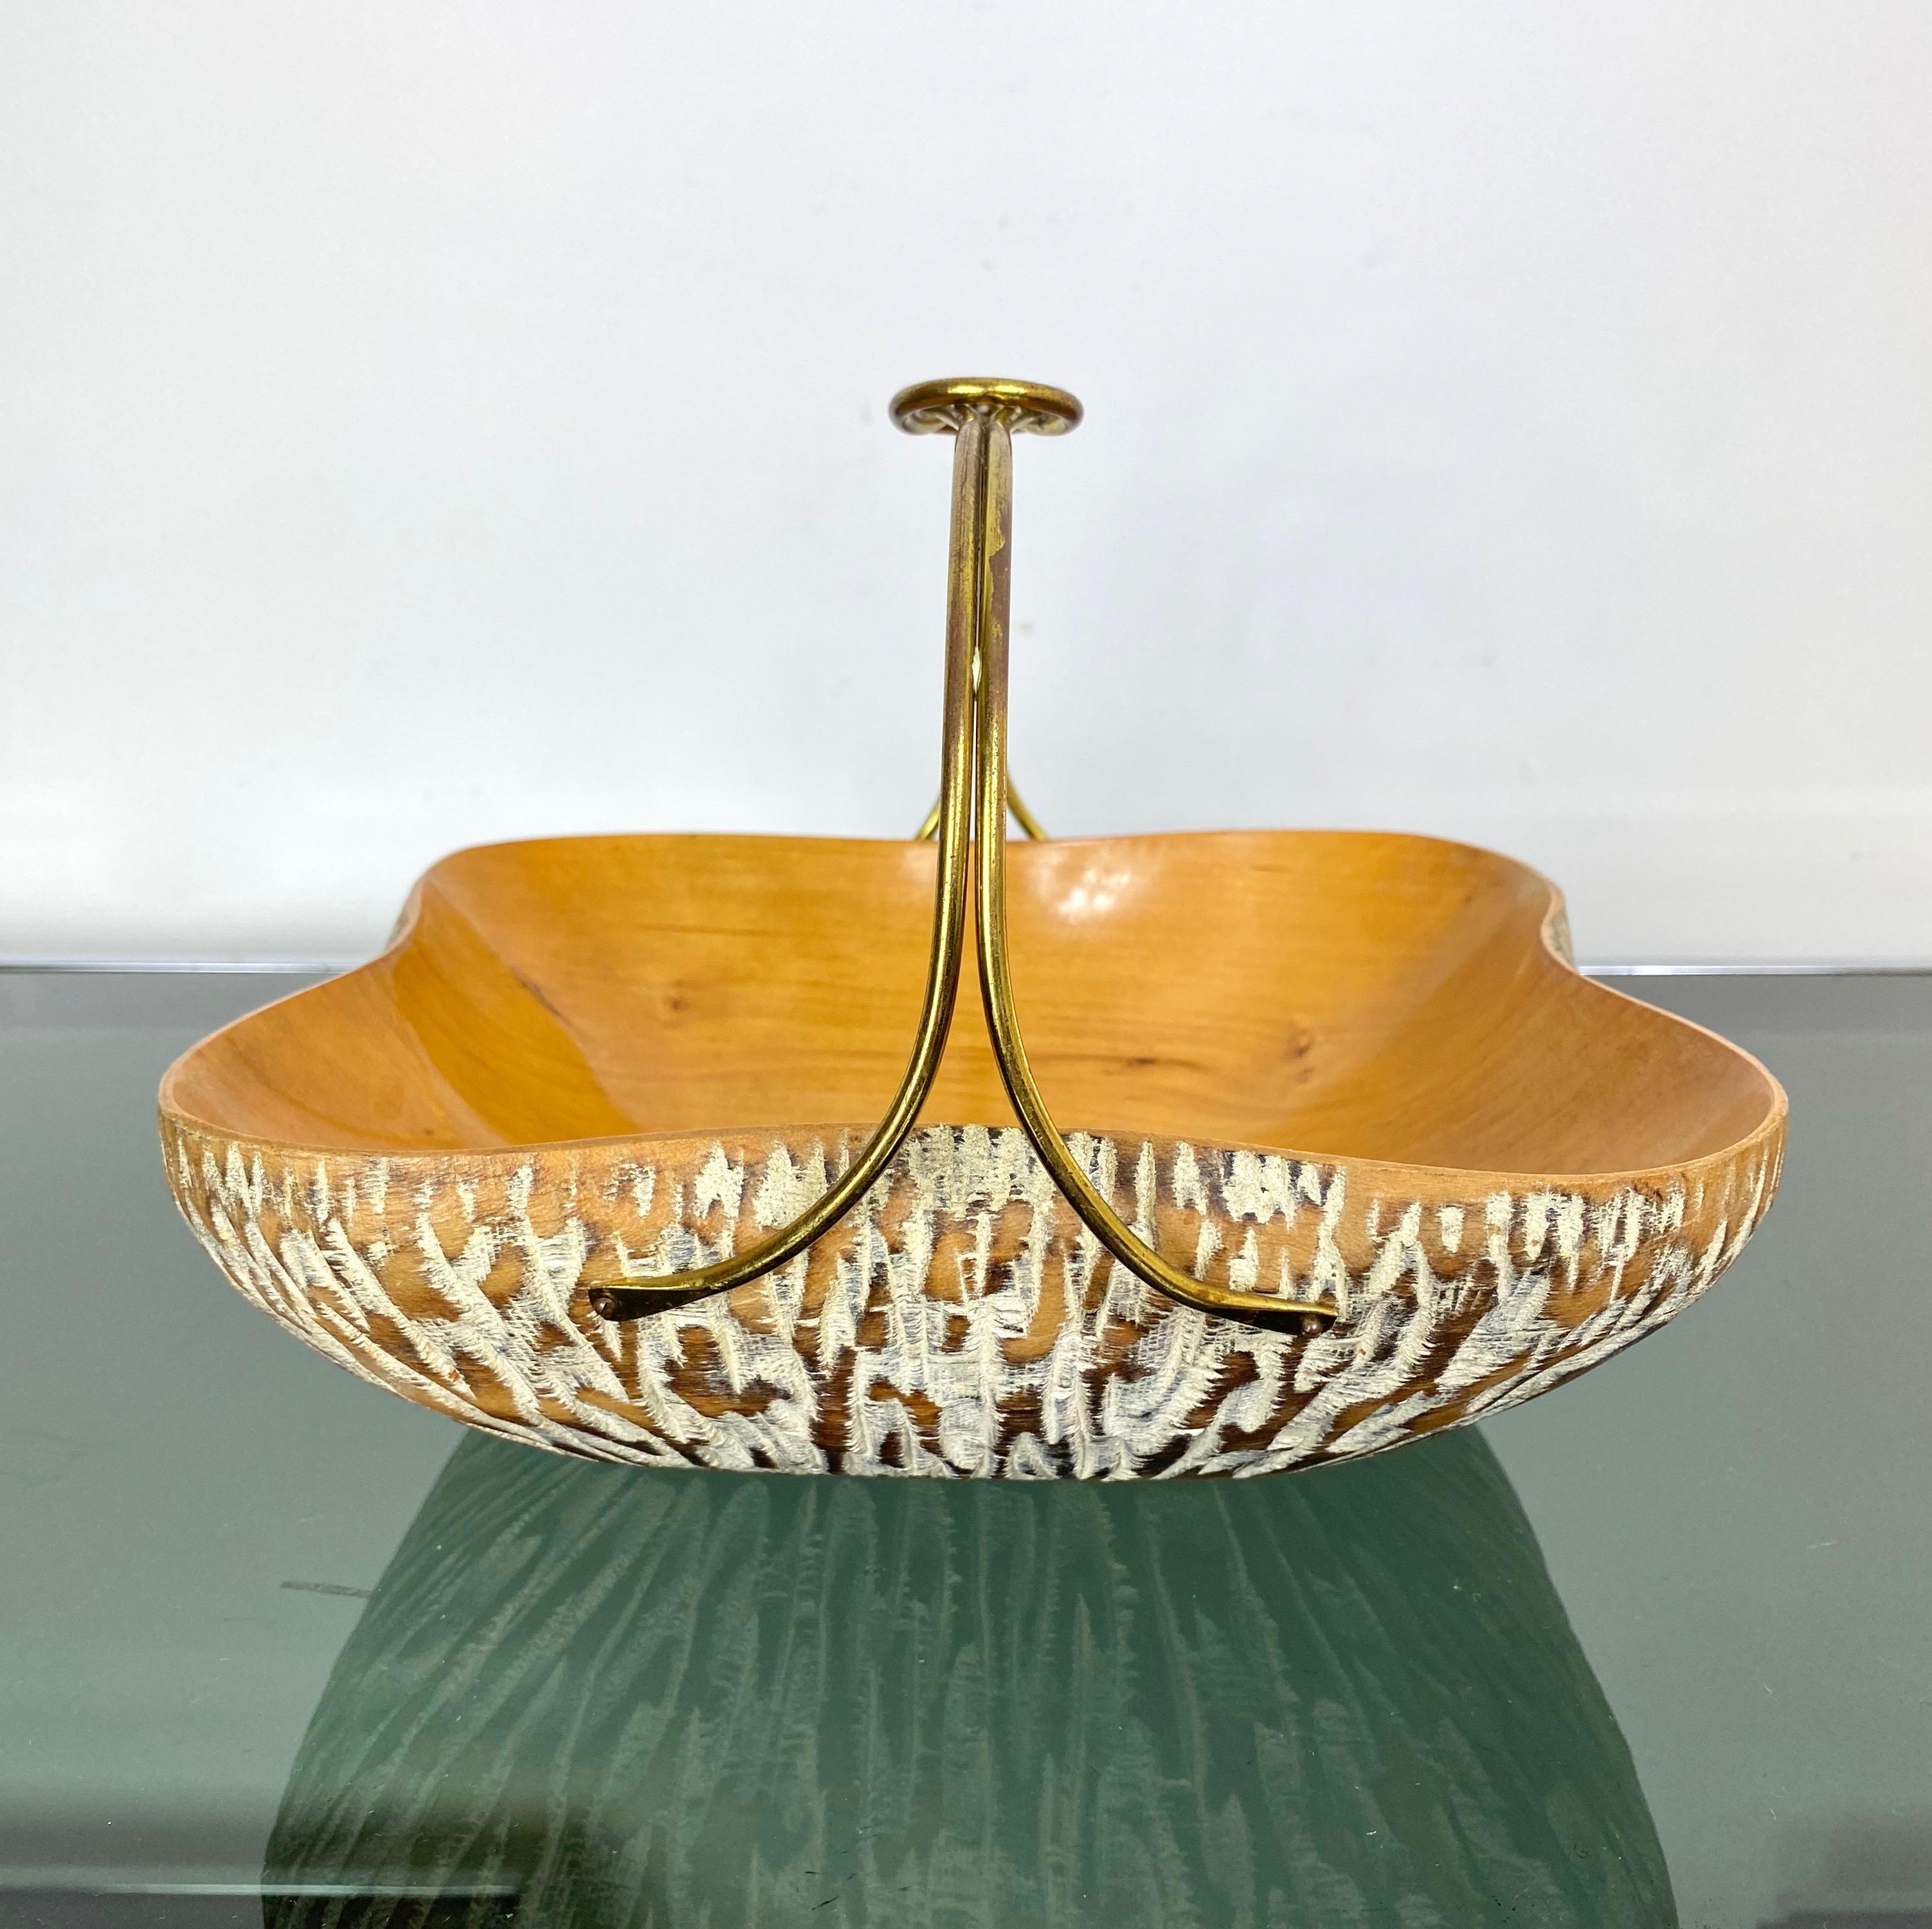 Aldo Tura for Macabo Walnut Bowl Basket Centrepiece Wood and Brass, Italy, 1950s In Good Condition For Sale In Rome, IT